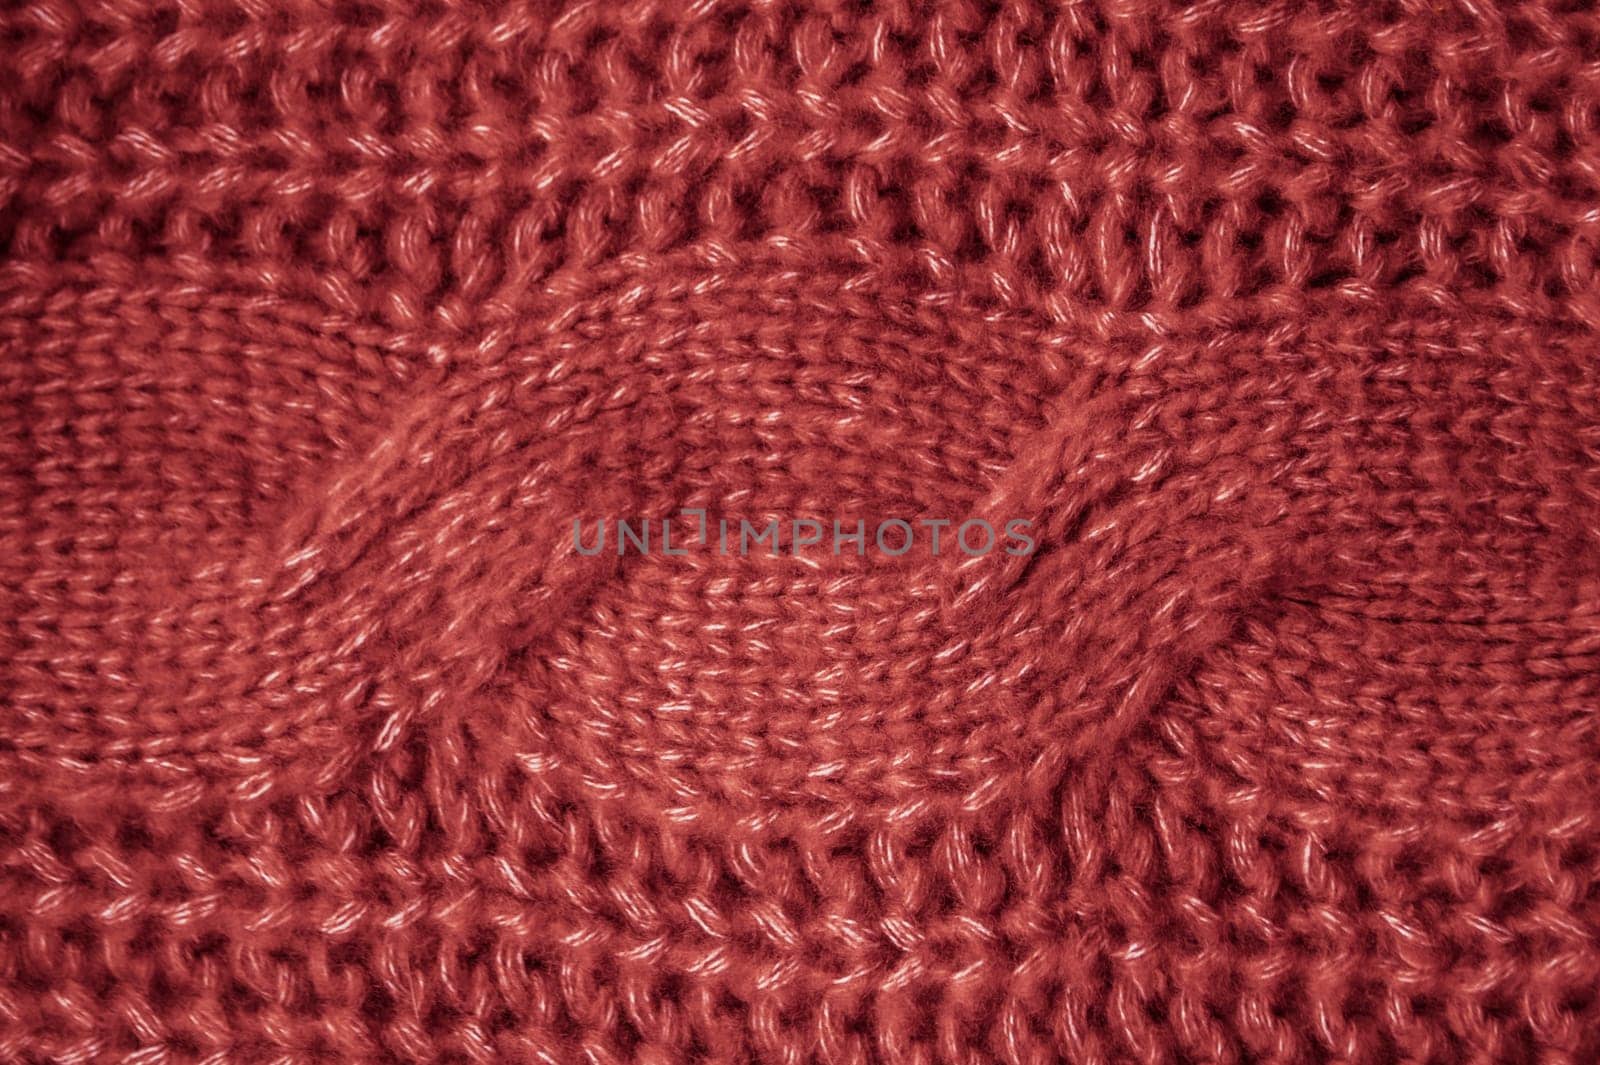 Closeup Knitted Wool. Organic Woven Textile. Structure Jacquard Winter Background. Knitted Fabric. Red Soft Thread. Nordic Holiday Blanket. Detail Jumper Cashmere. Weave Abstract Wool.